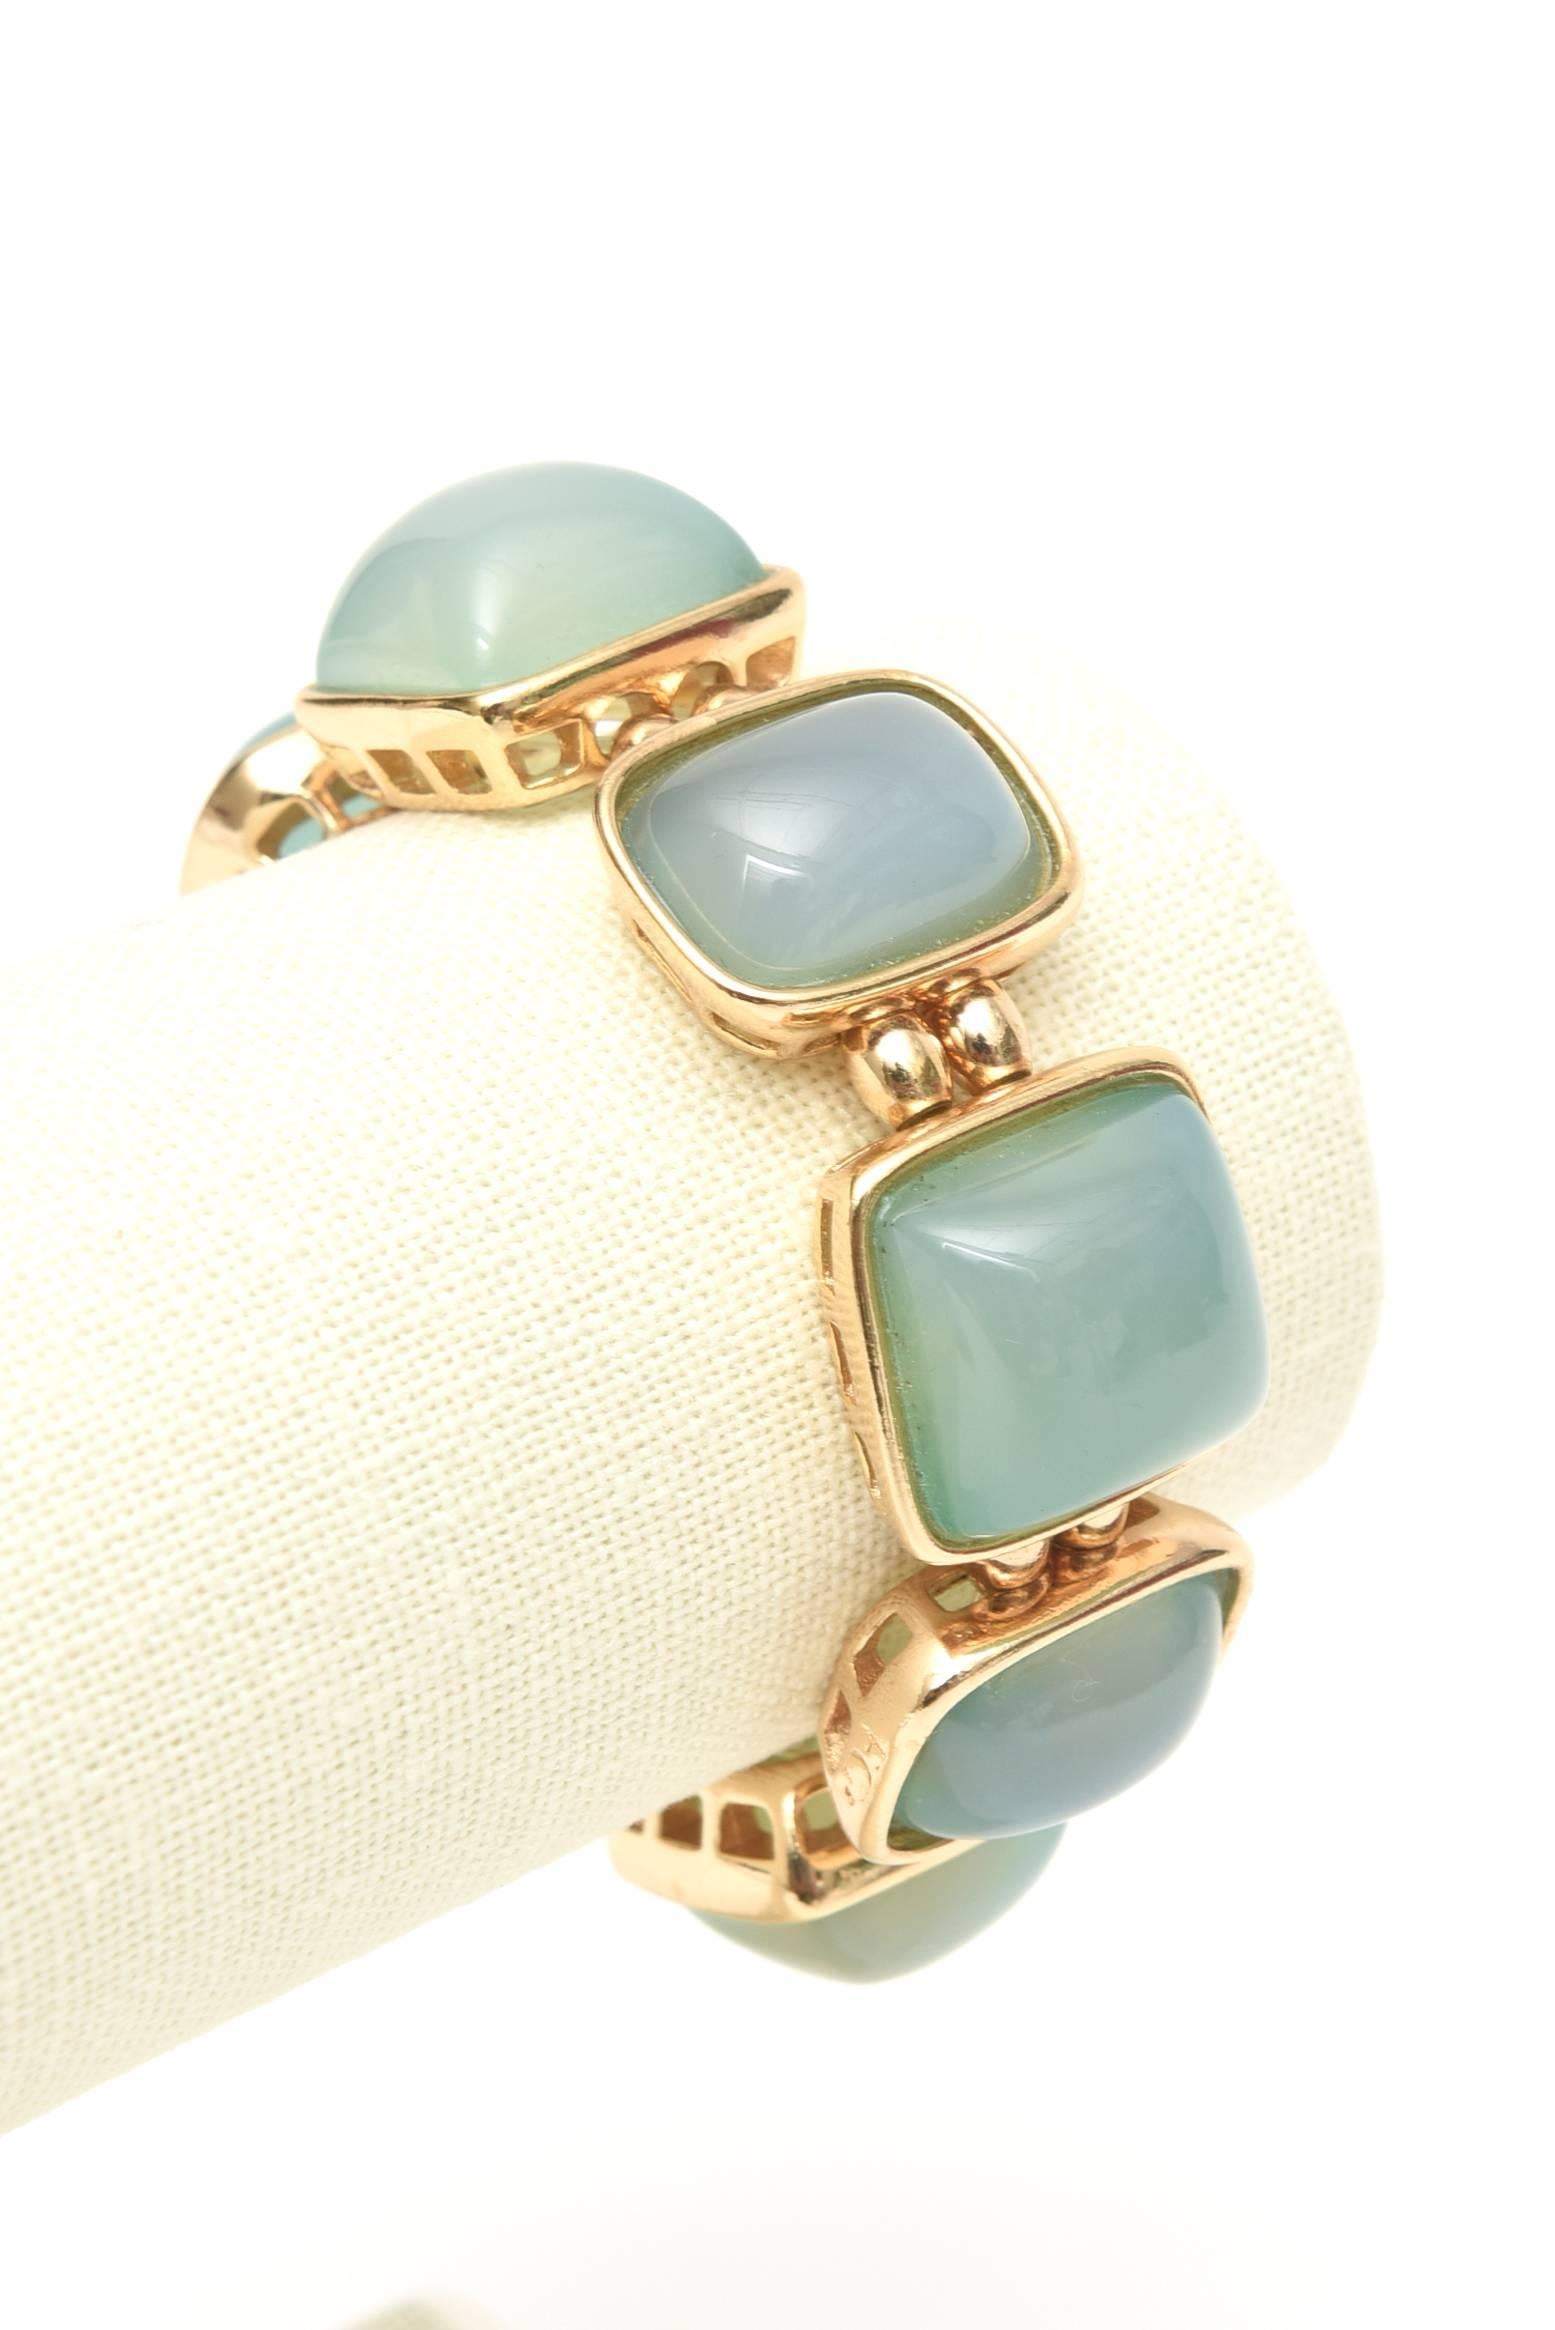 Set of Cabochon Chalcedony 24 Gold Plated Bracelet and Earrings SAT. SALE 4